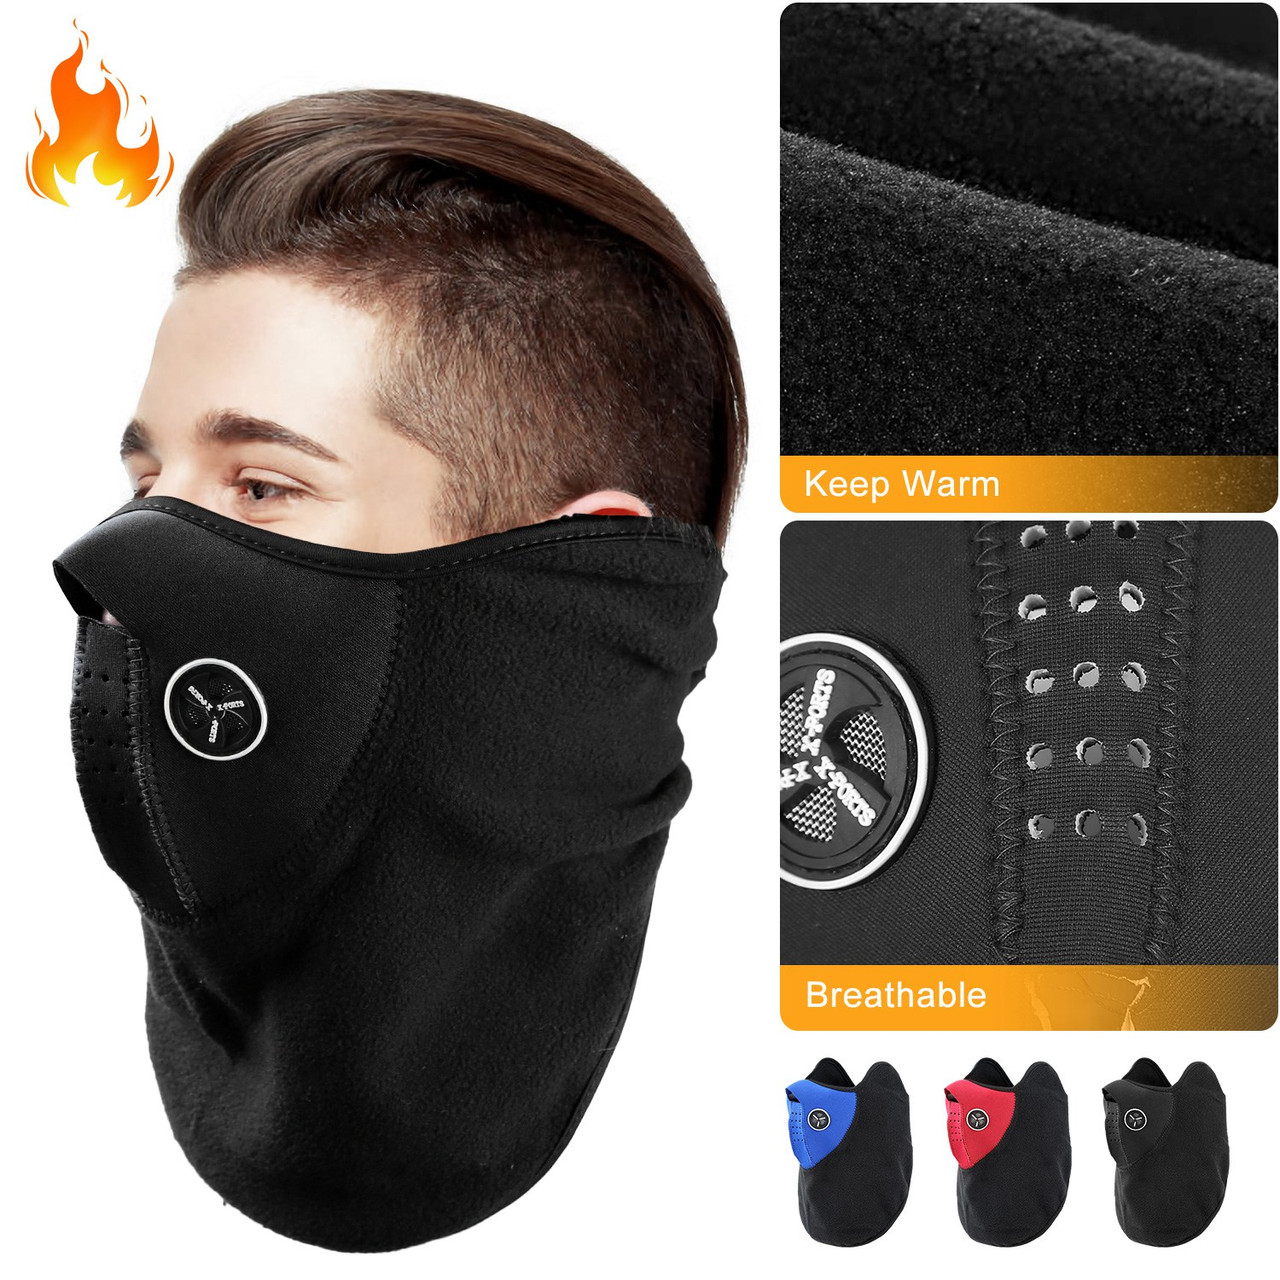 Neck/Face Warmer Mask product image